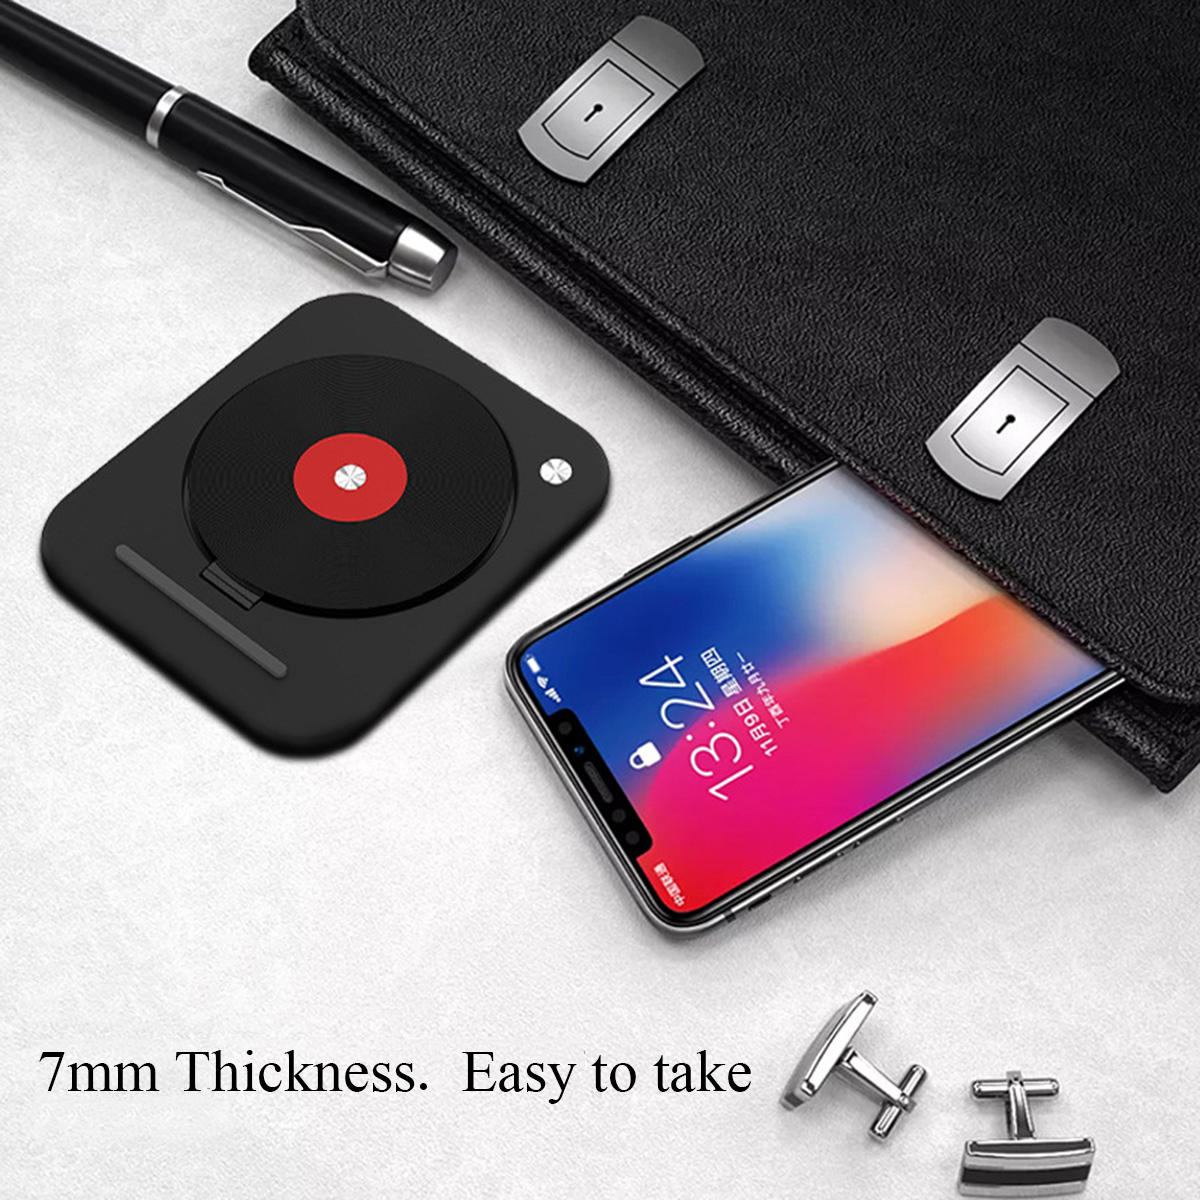 Bakeey-10W-Qi-Wireless-Charger-Collapsable-Fast-Charging-Pad-For-iphone-X-88Plus-Samsung-S8-S7-S6-1328956-5